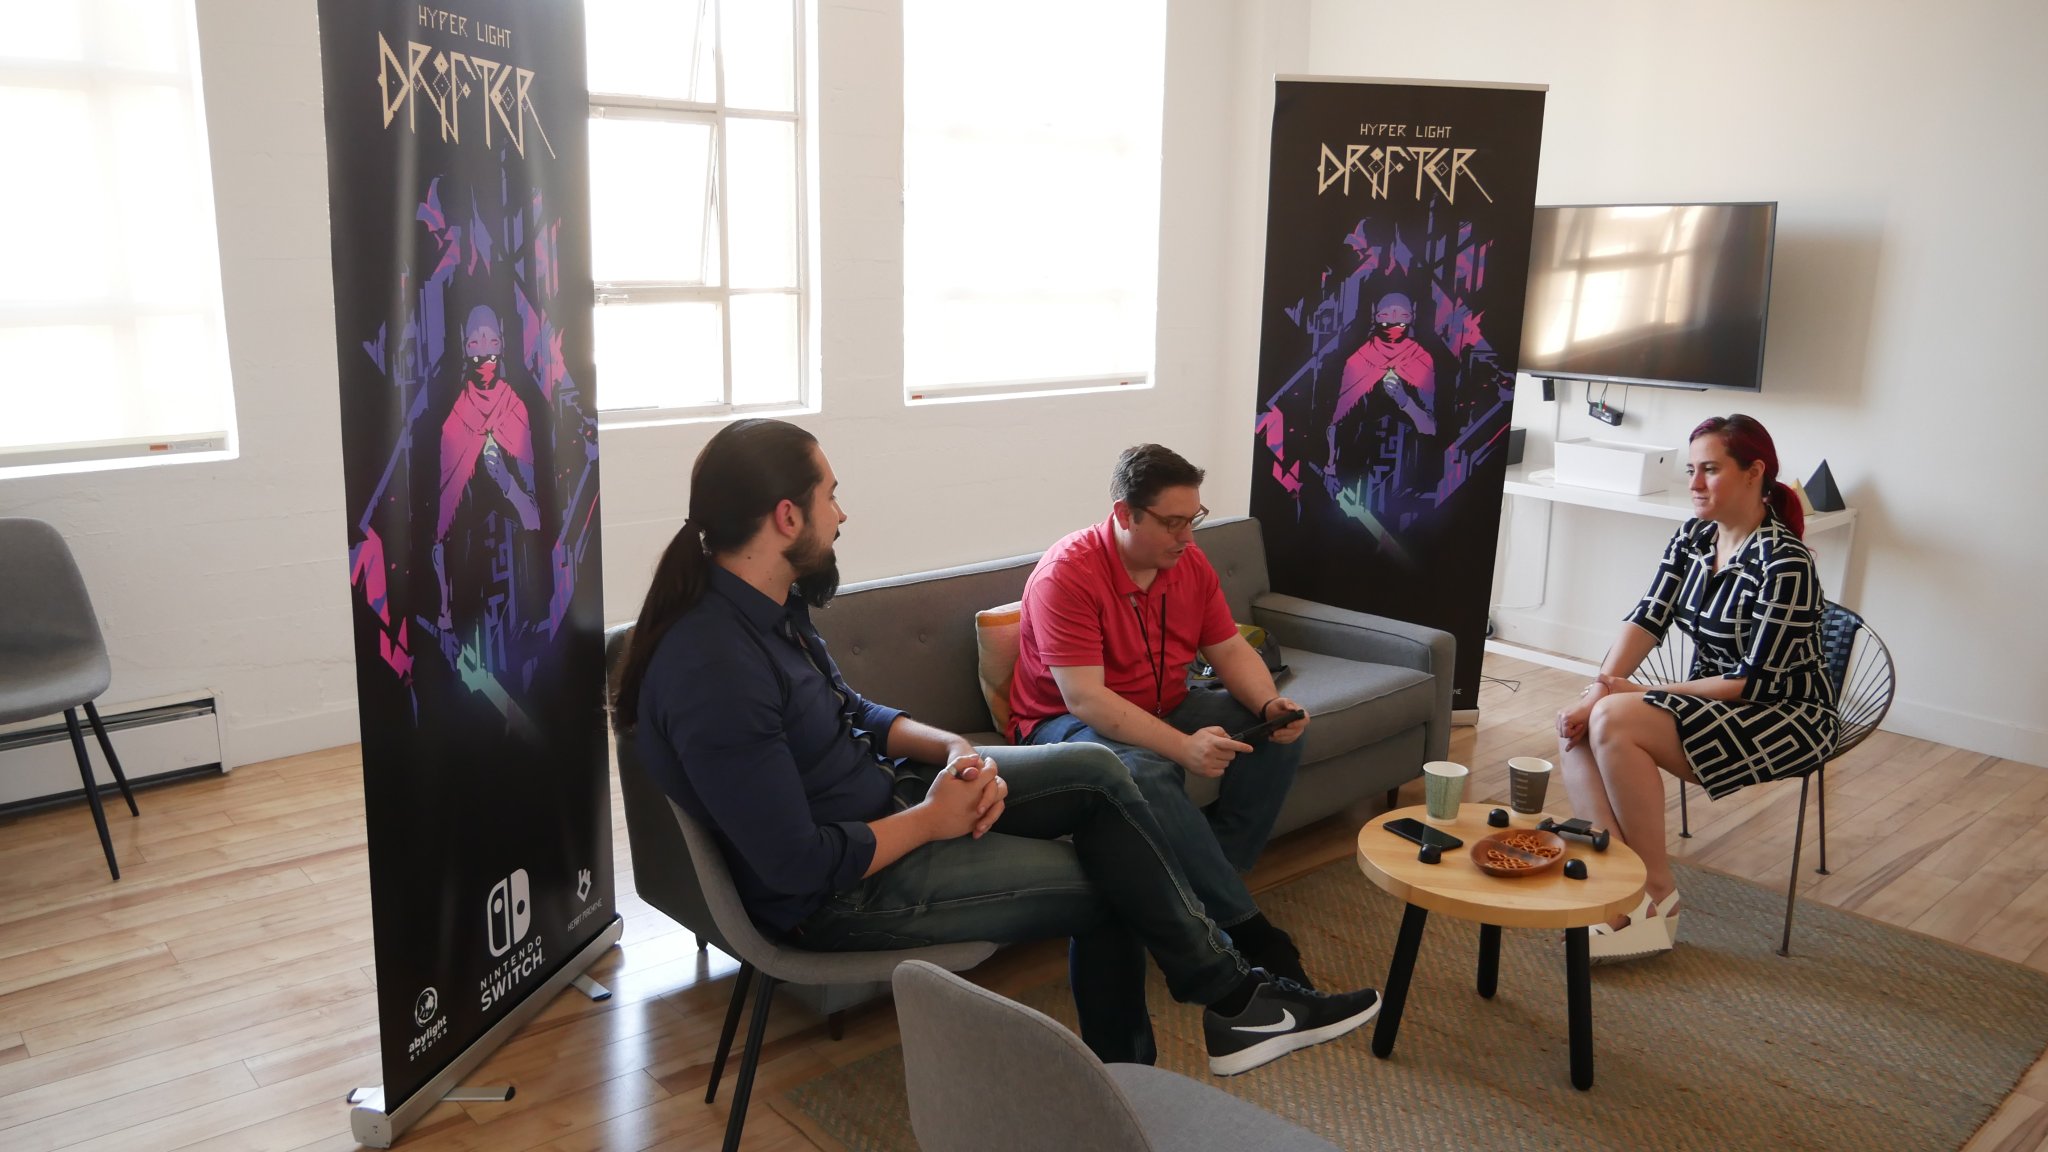 A summary about the hands-on Hyper Light Drifter for Nintendo Switch